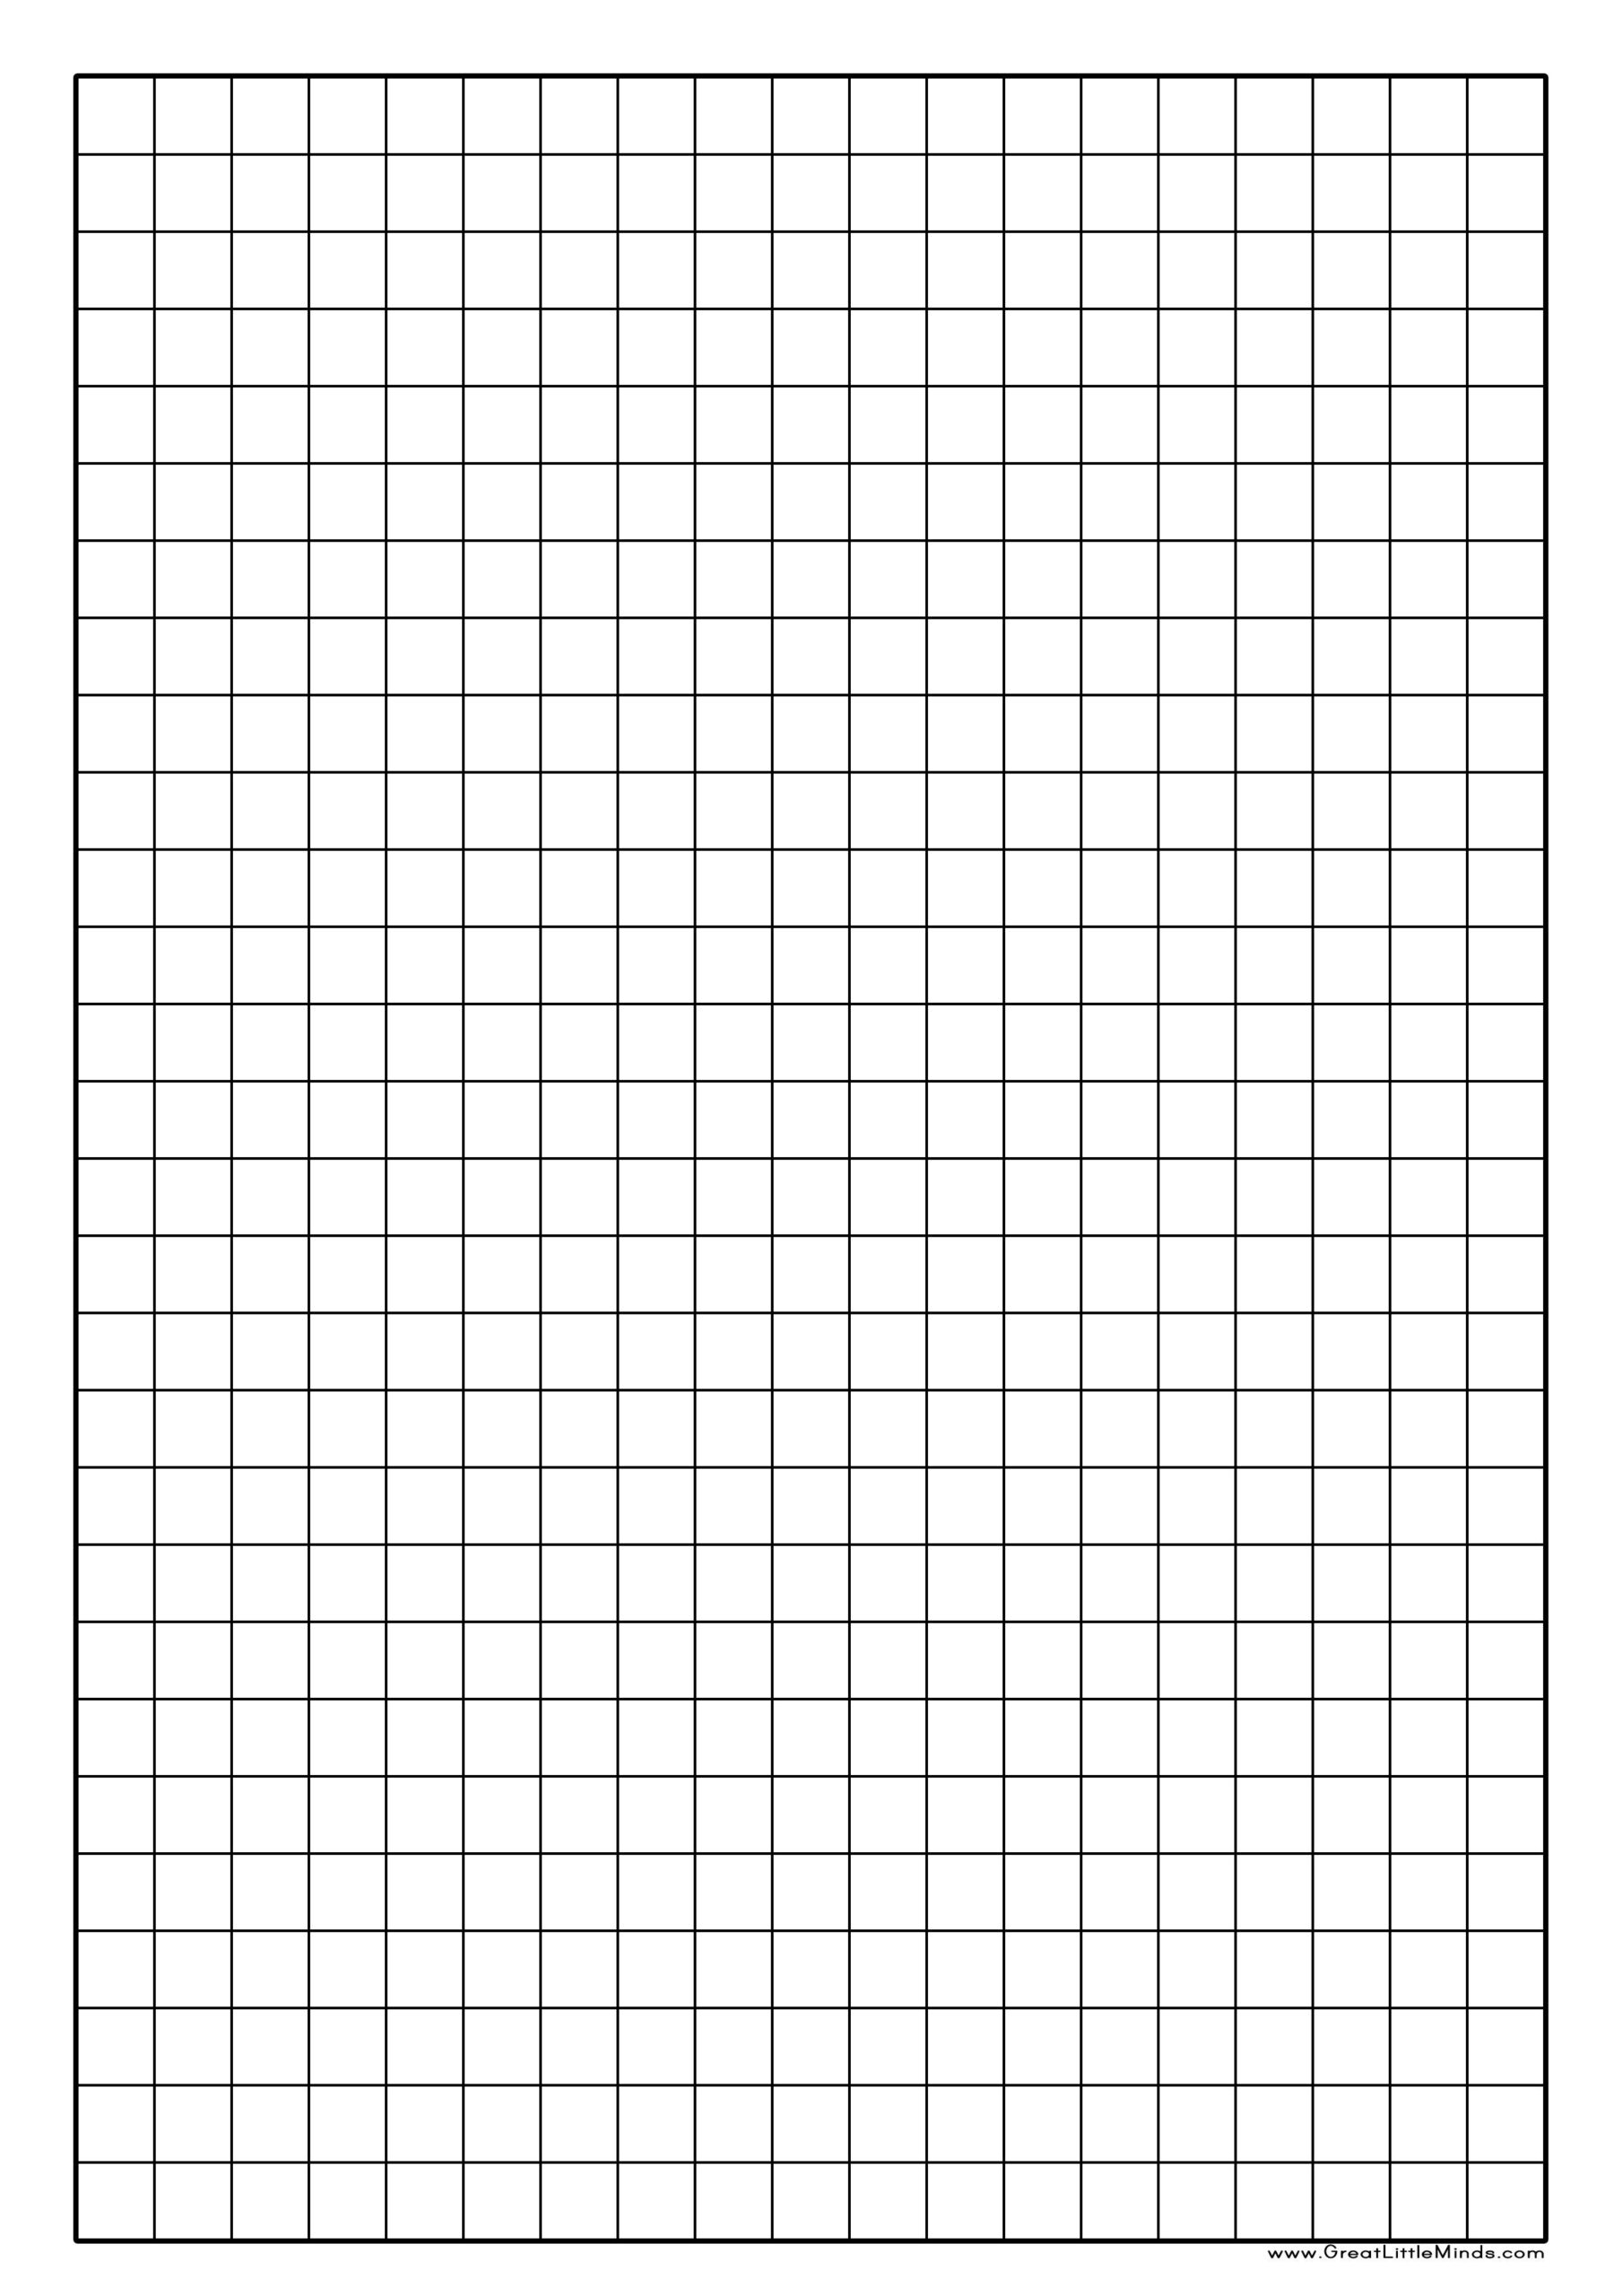 Graphing Paper Print Out Click On The Image For A PDF Version Which 